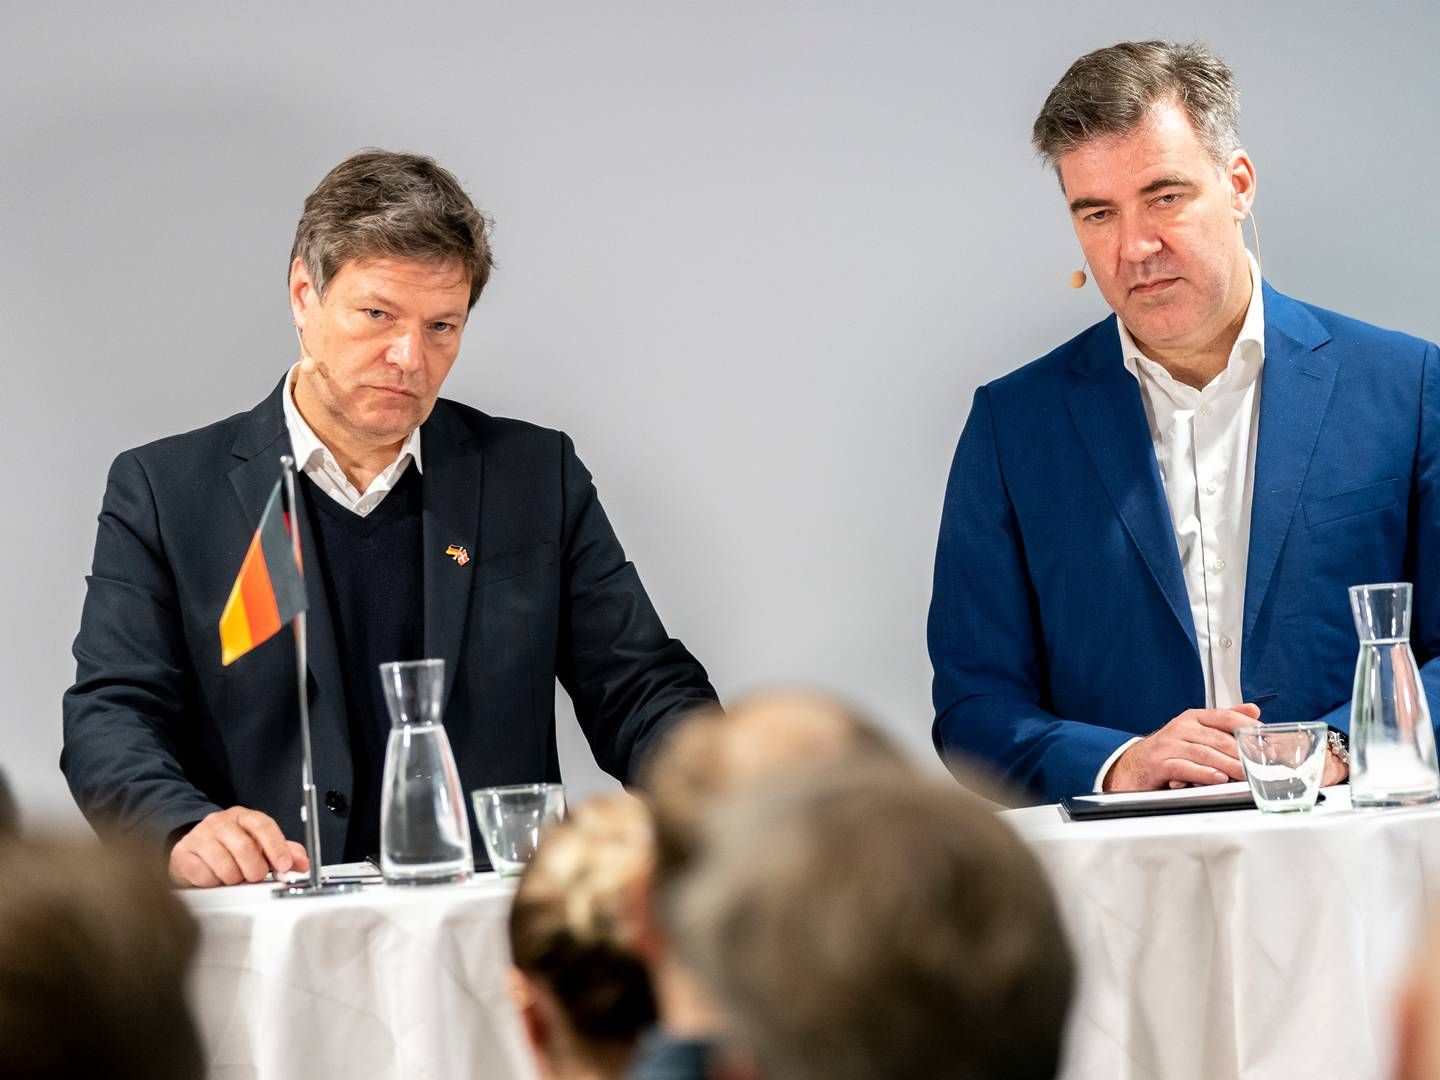 Danish energy minister Lars Aagaard and his German colleague Robert Habeck both see eye to eye on labelling nuclear power as a renewable or not. | Foto: Ida Marie Odgaard/Ritzau Scanpix